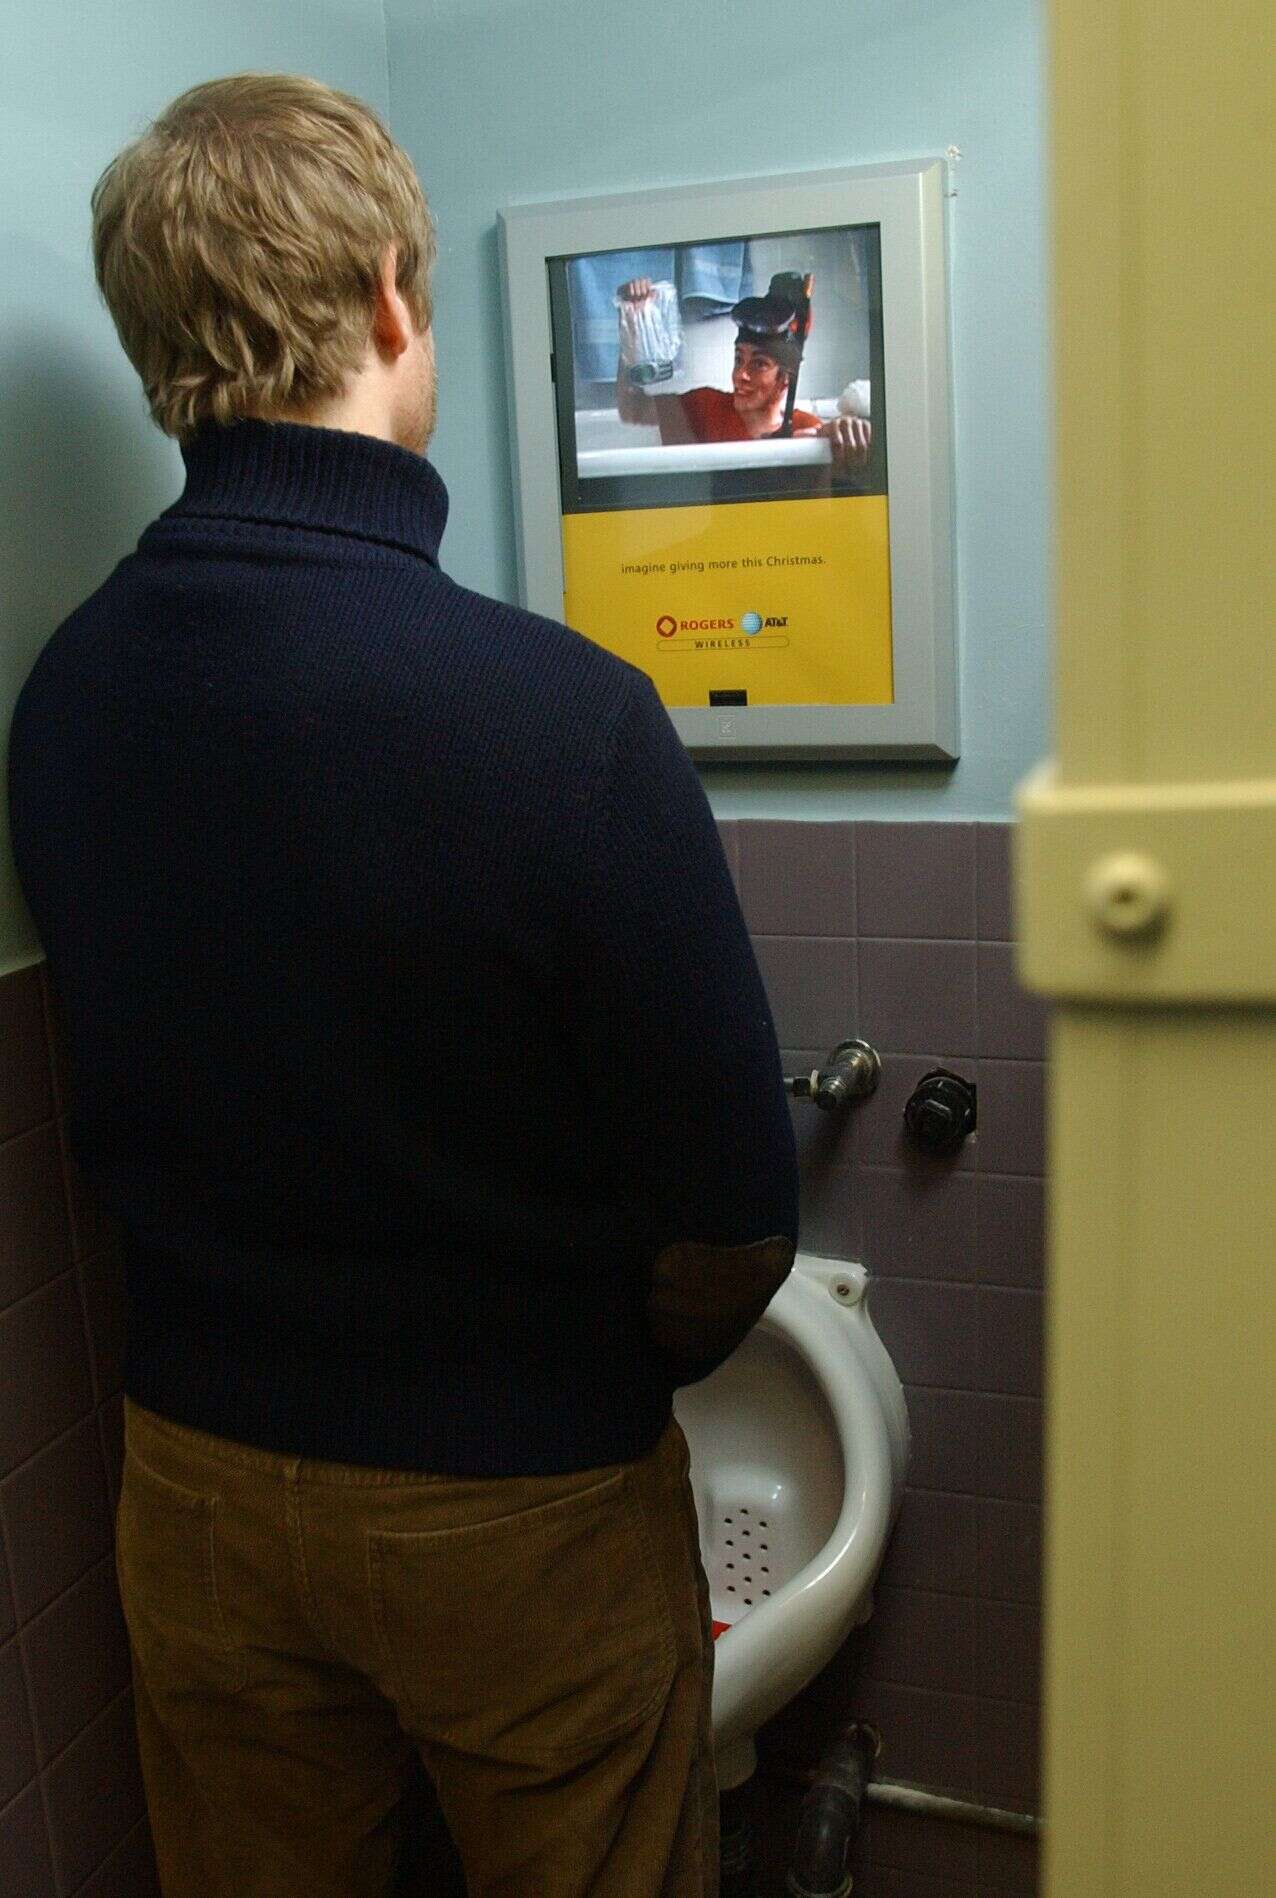 Bar One now features the next wave of above the urinal advertising for captive audiences. (Photo by Lucas Oleniuk/Toronto Star via Getty Images)